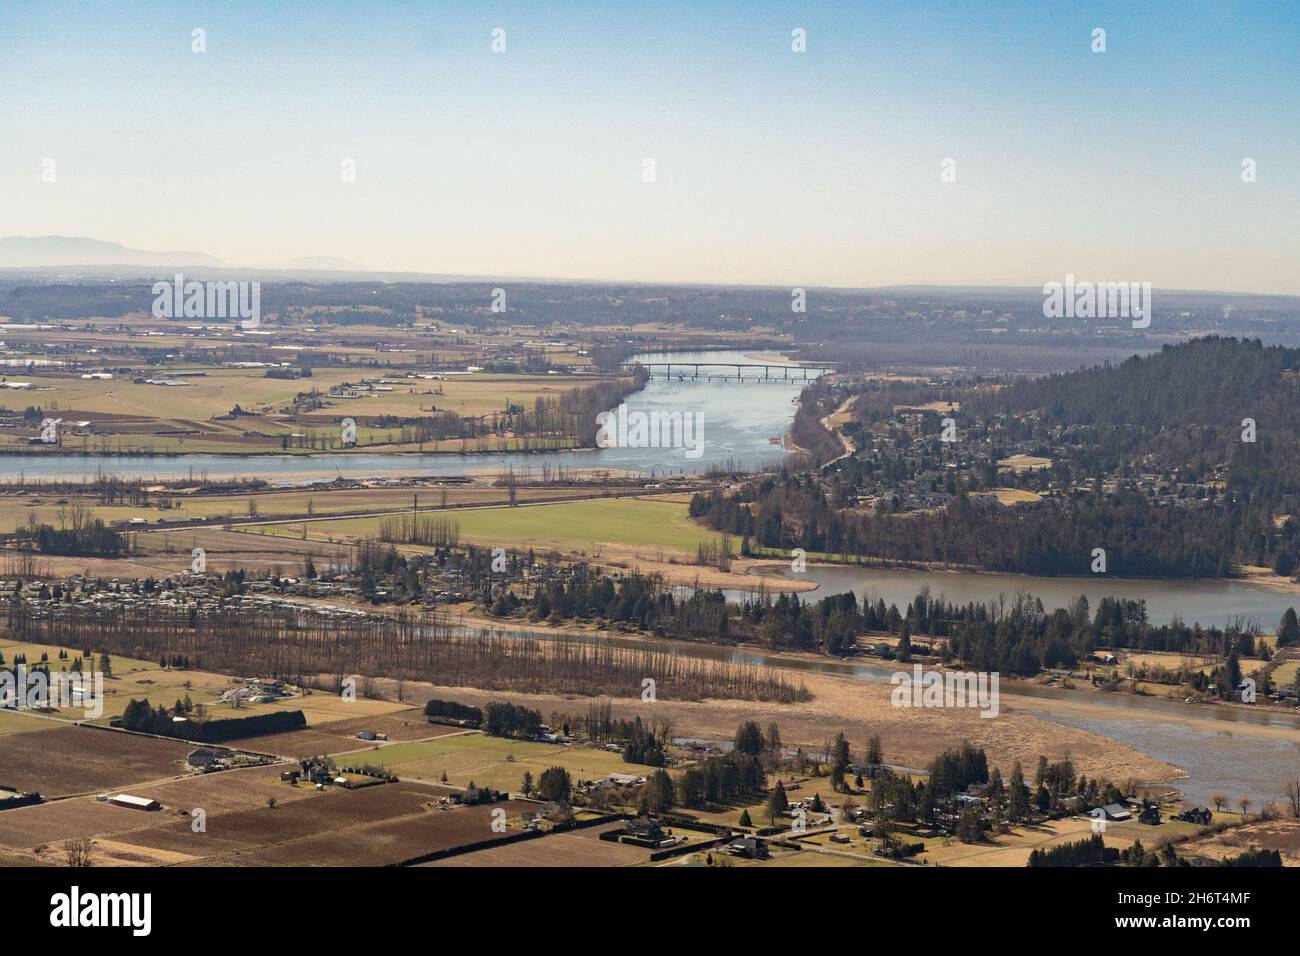 View of the Fraser River Valley close to the village of Hatzic with the Mission Bridge in the background. Stock Photo